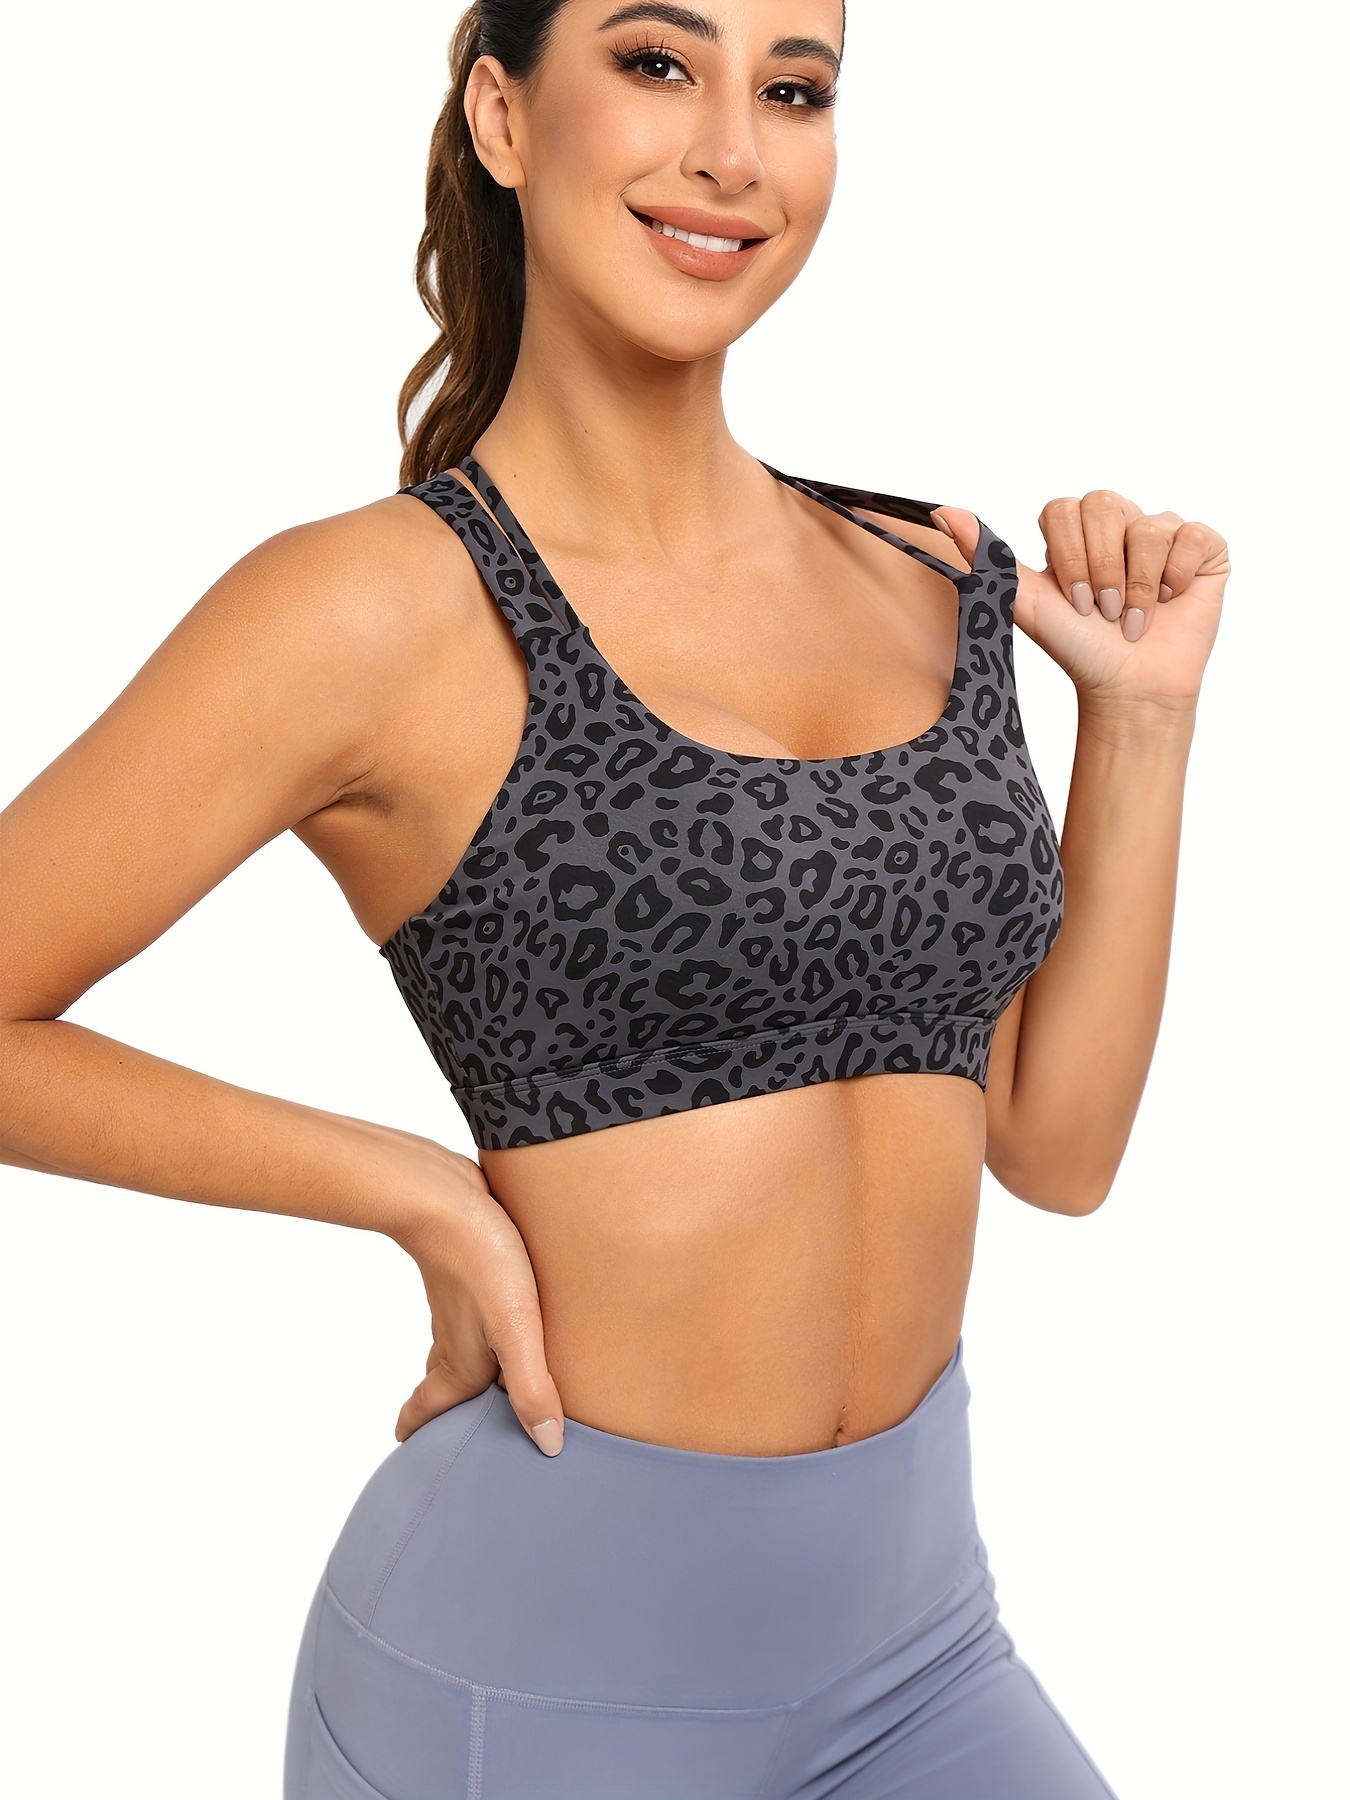 Sports Bras for Women. Backless. Padded. Medium Support. Exercise, Fitness,  Yoga, & Everyday Wear. Underwire Free. Cute.